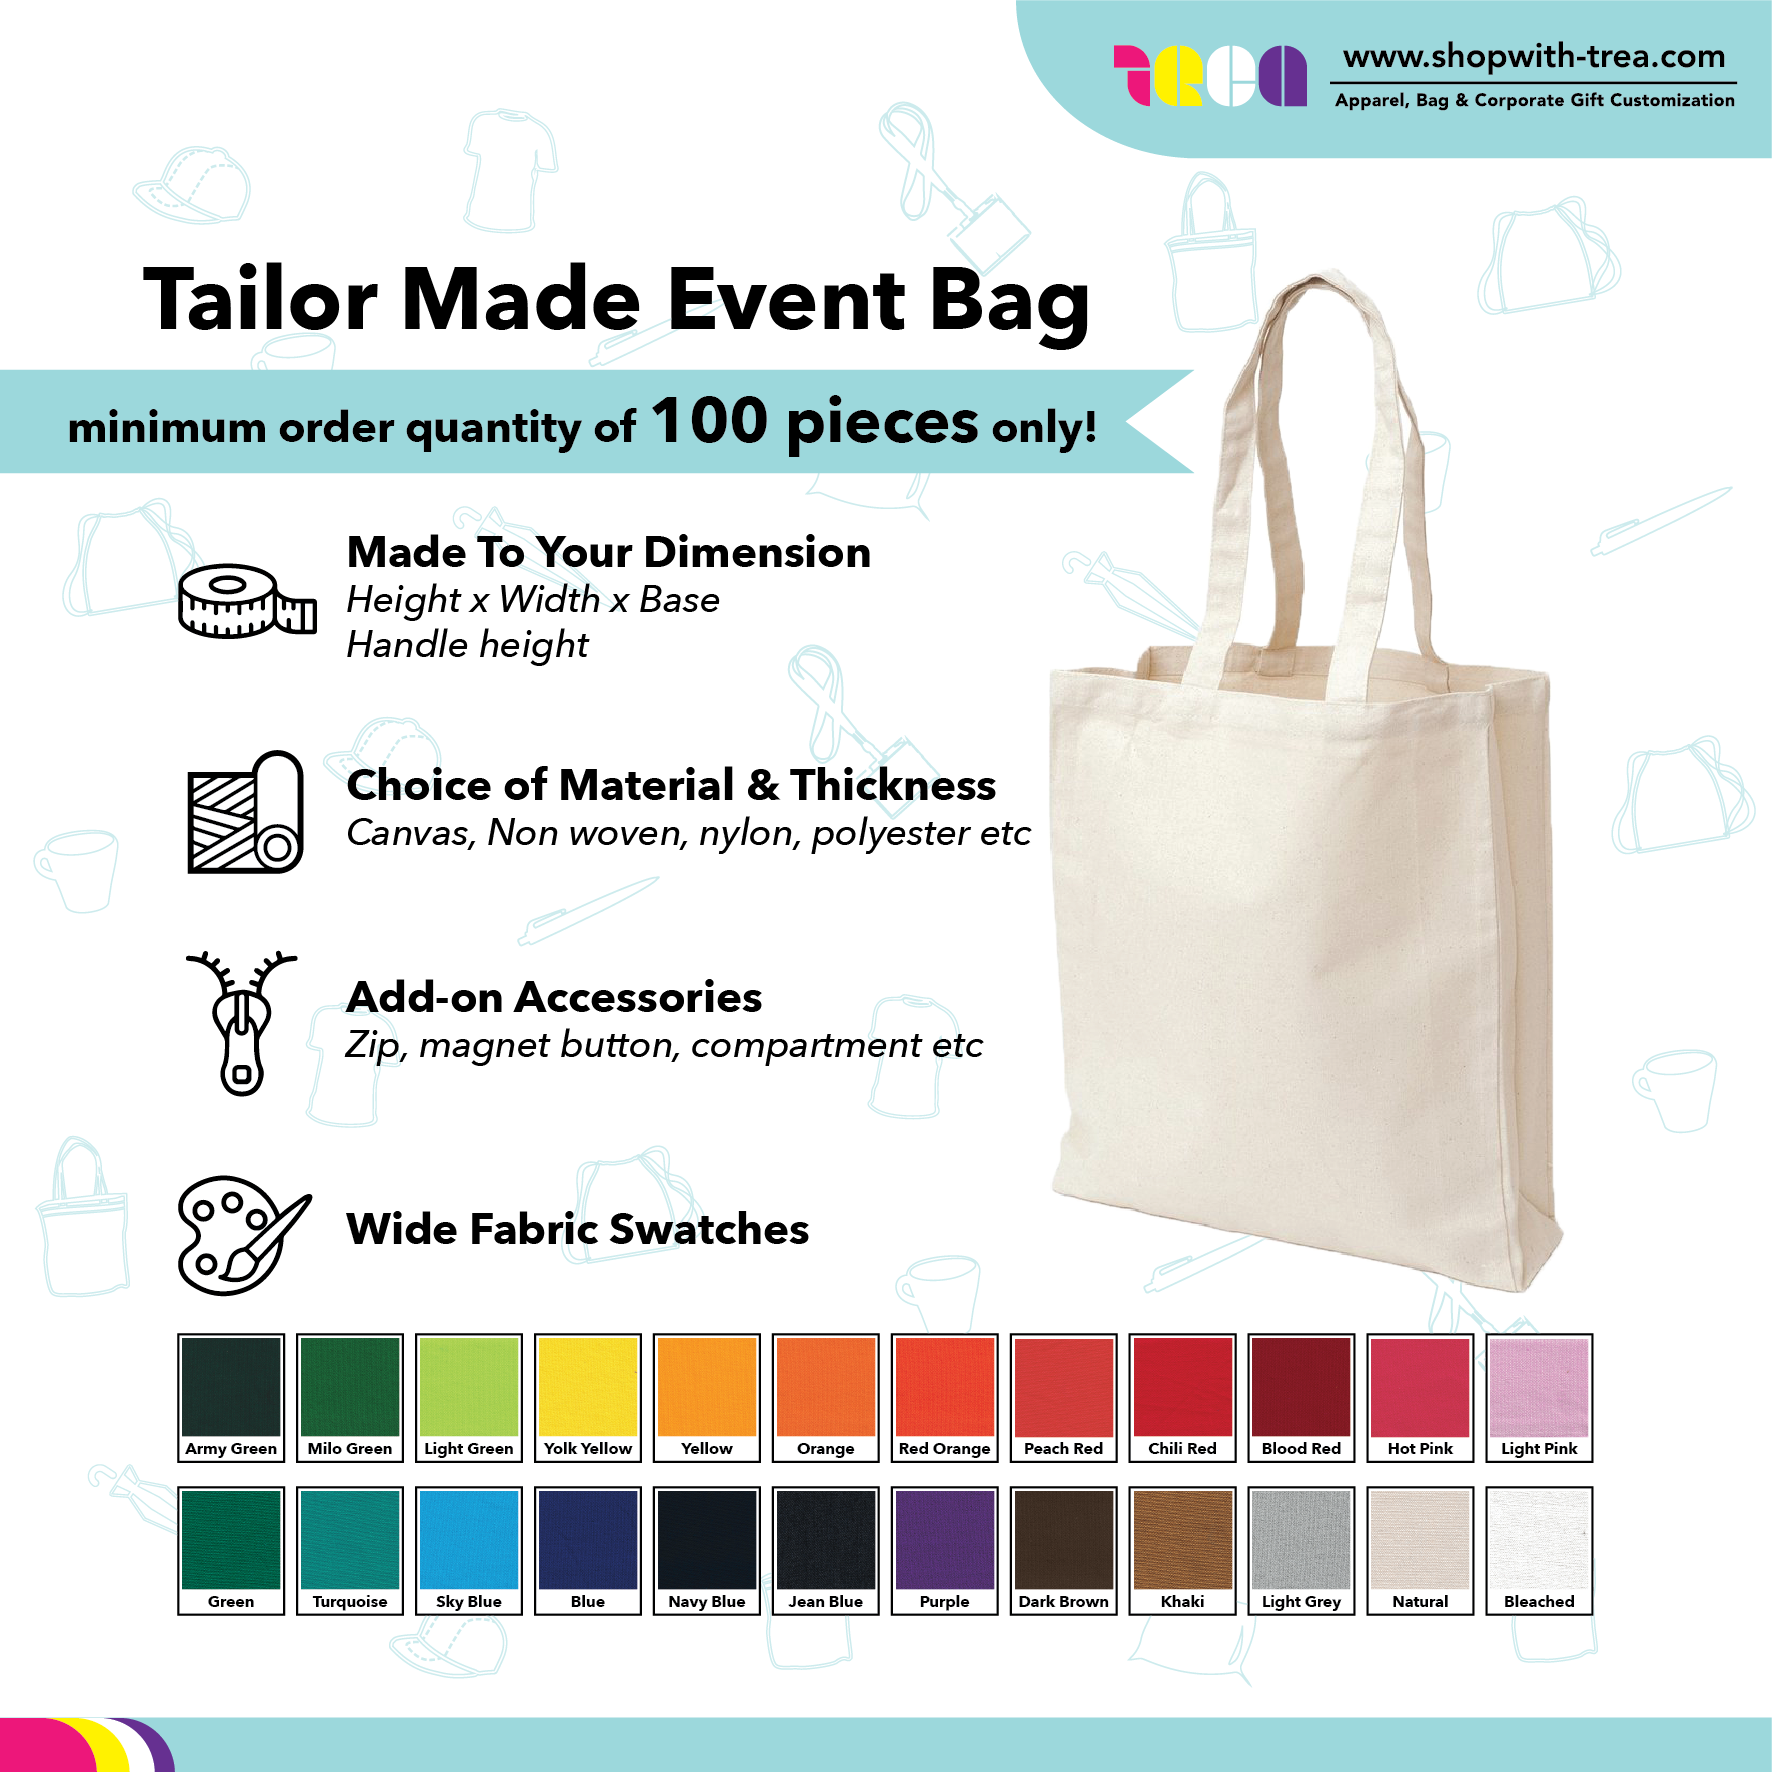 Tailored made event bag